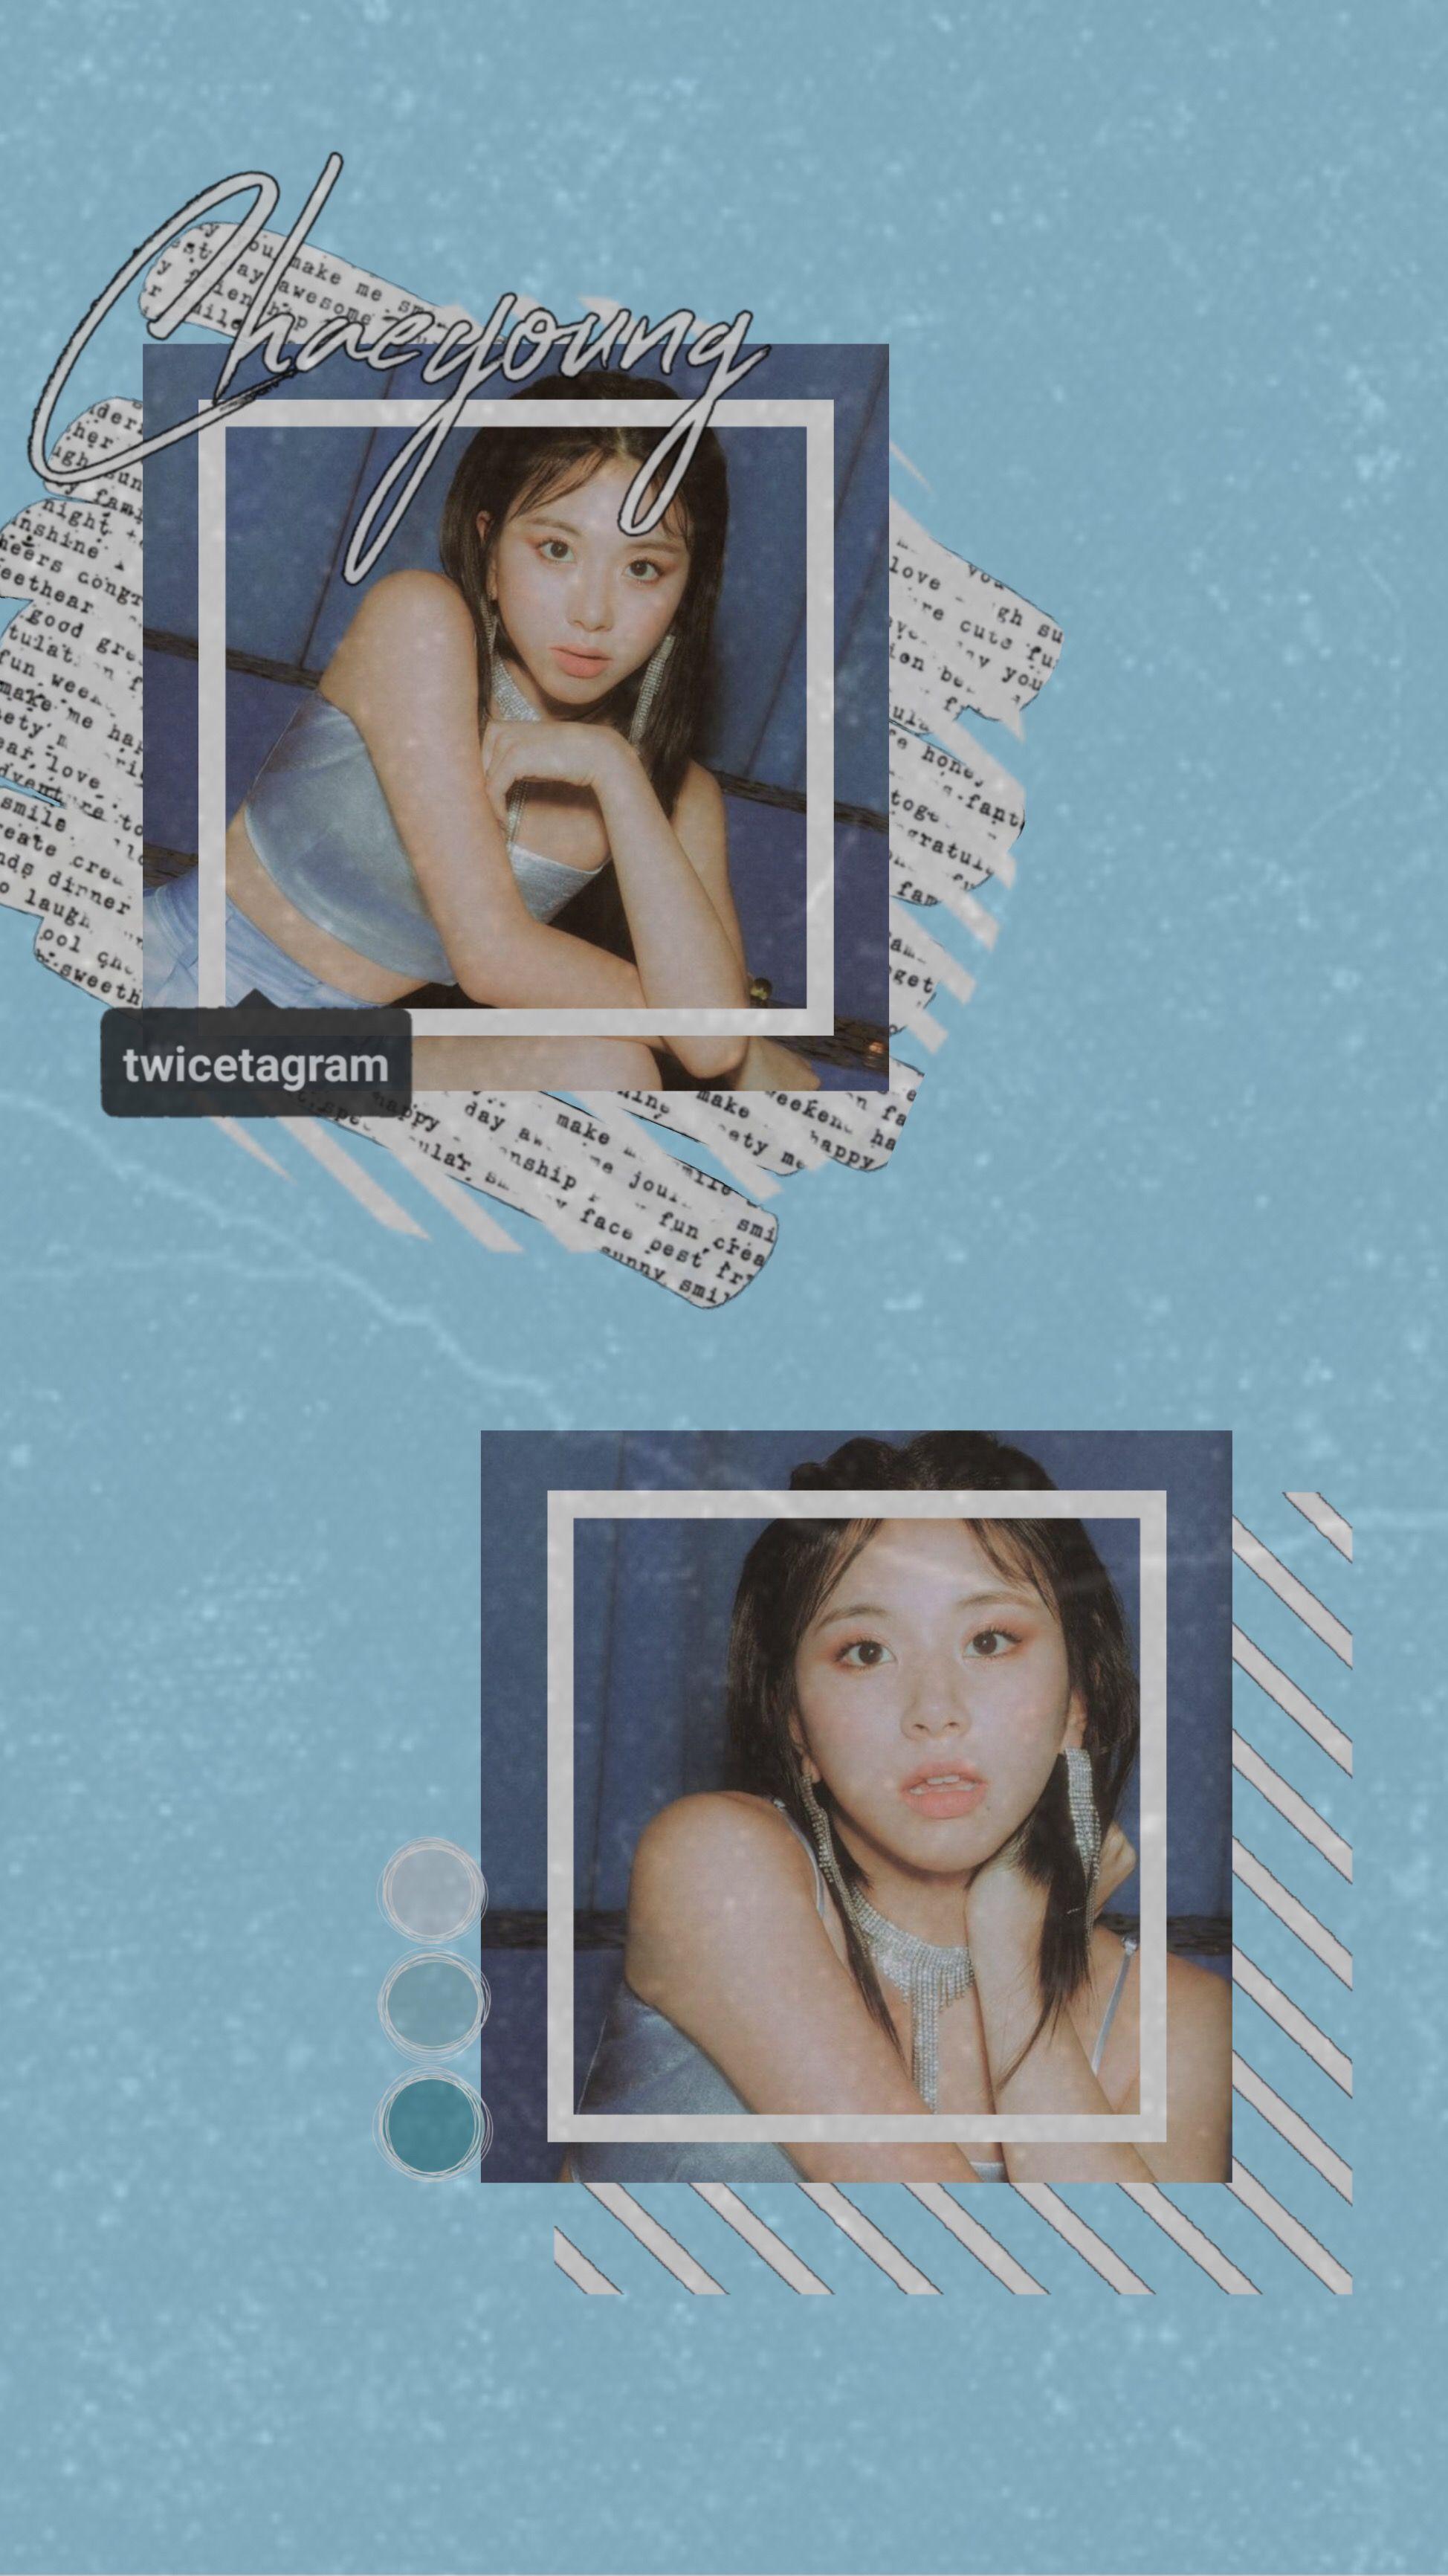 Wallpaper Twice Chaeyoung Feel Special #twice #wallpaper